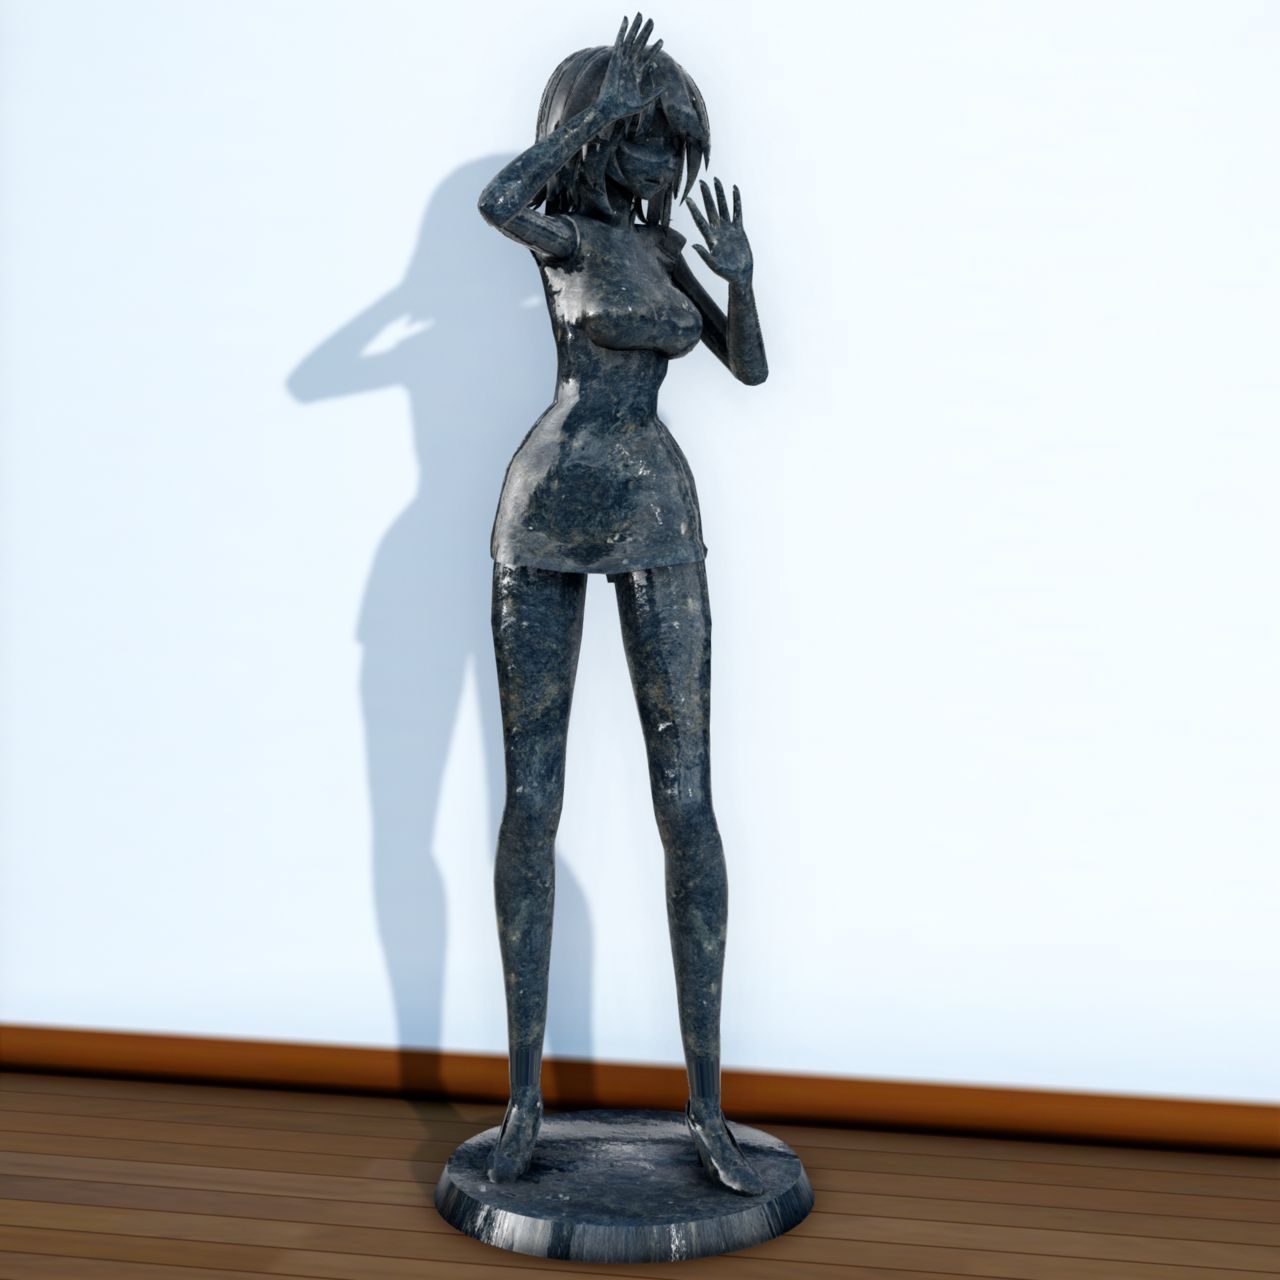 MMD ASFR from Sofia-MMD (Petrification/Doll/Mannequin/Freeze/etc.) 358